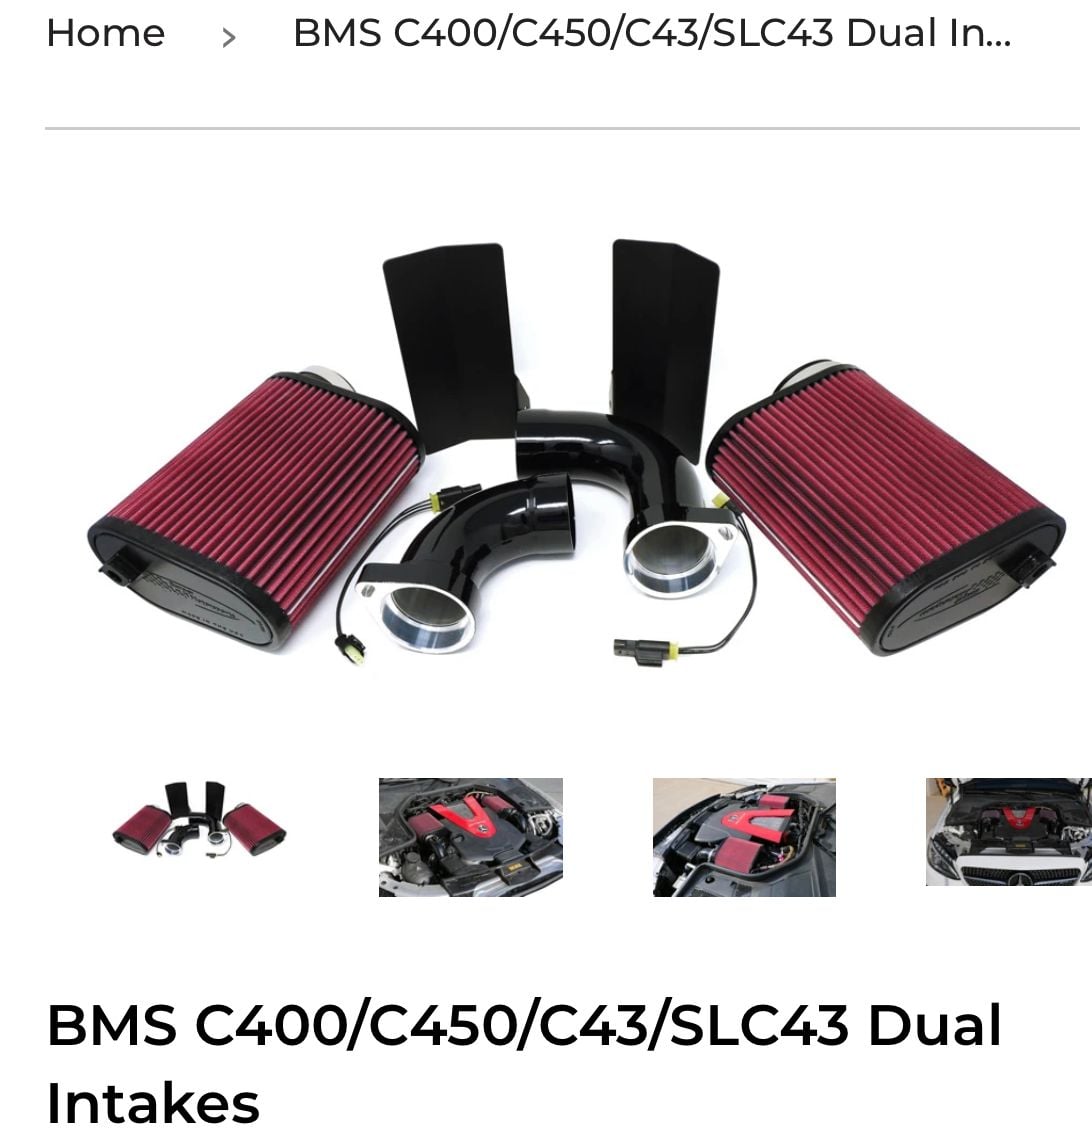 Engine - Power Adders - JB4 tuner w/ Bluetooth connection and a BMS dual intake - Used - 2015 to 2020 Mercedes-Benz C43 AMG - 2015 to 2020 Mercedes-Benz C400 - 2015 to 2020 Mercedes-Benz C450 AMG - Boca Raton, FL 33486, United States